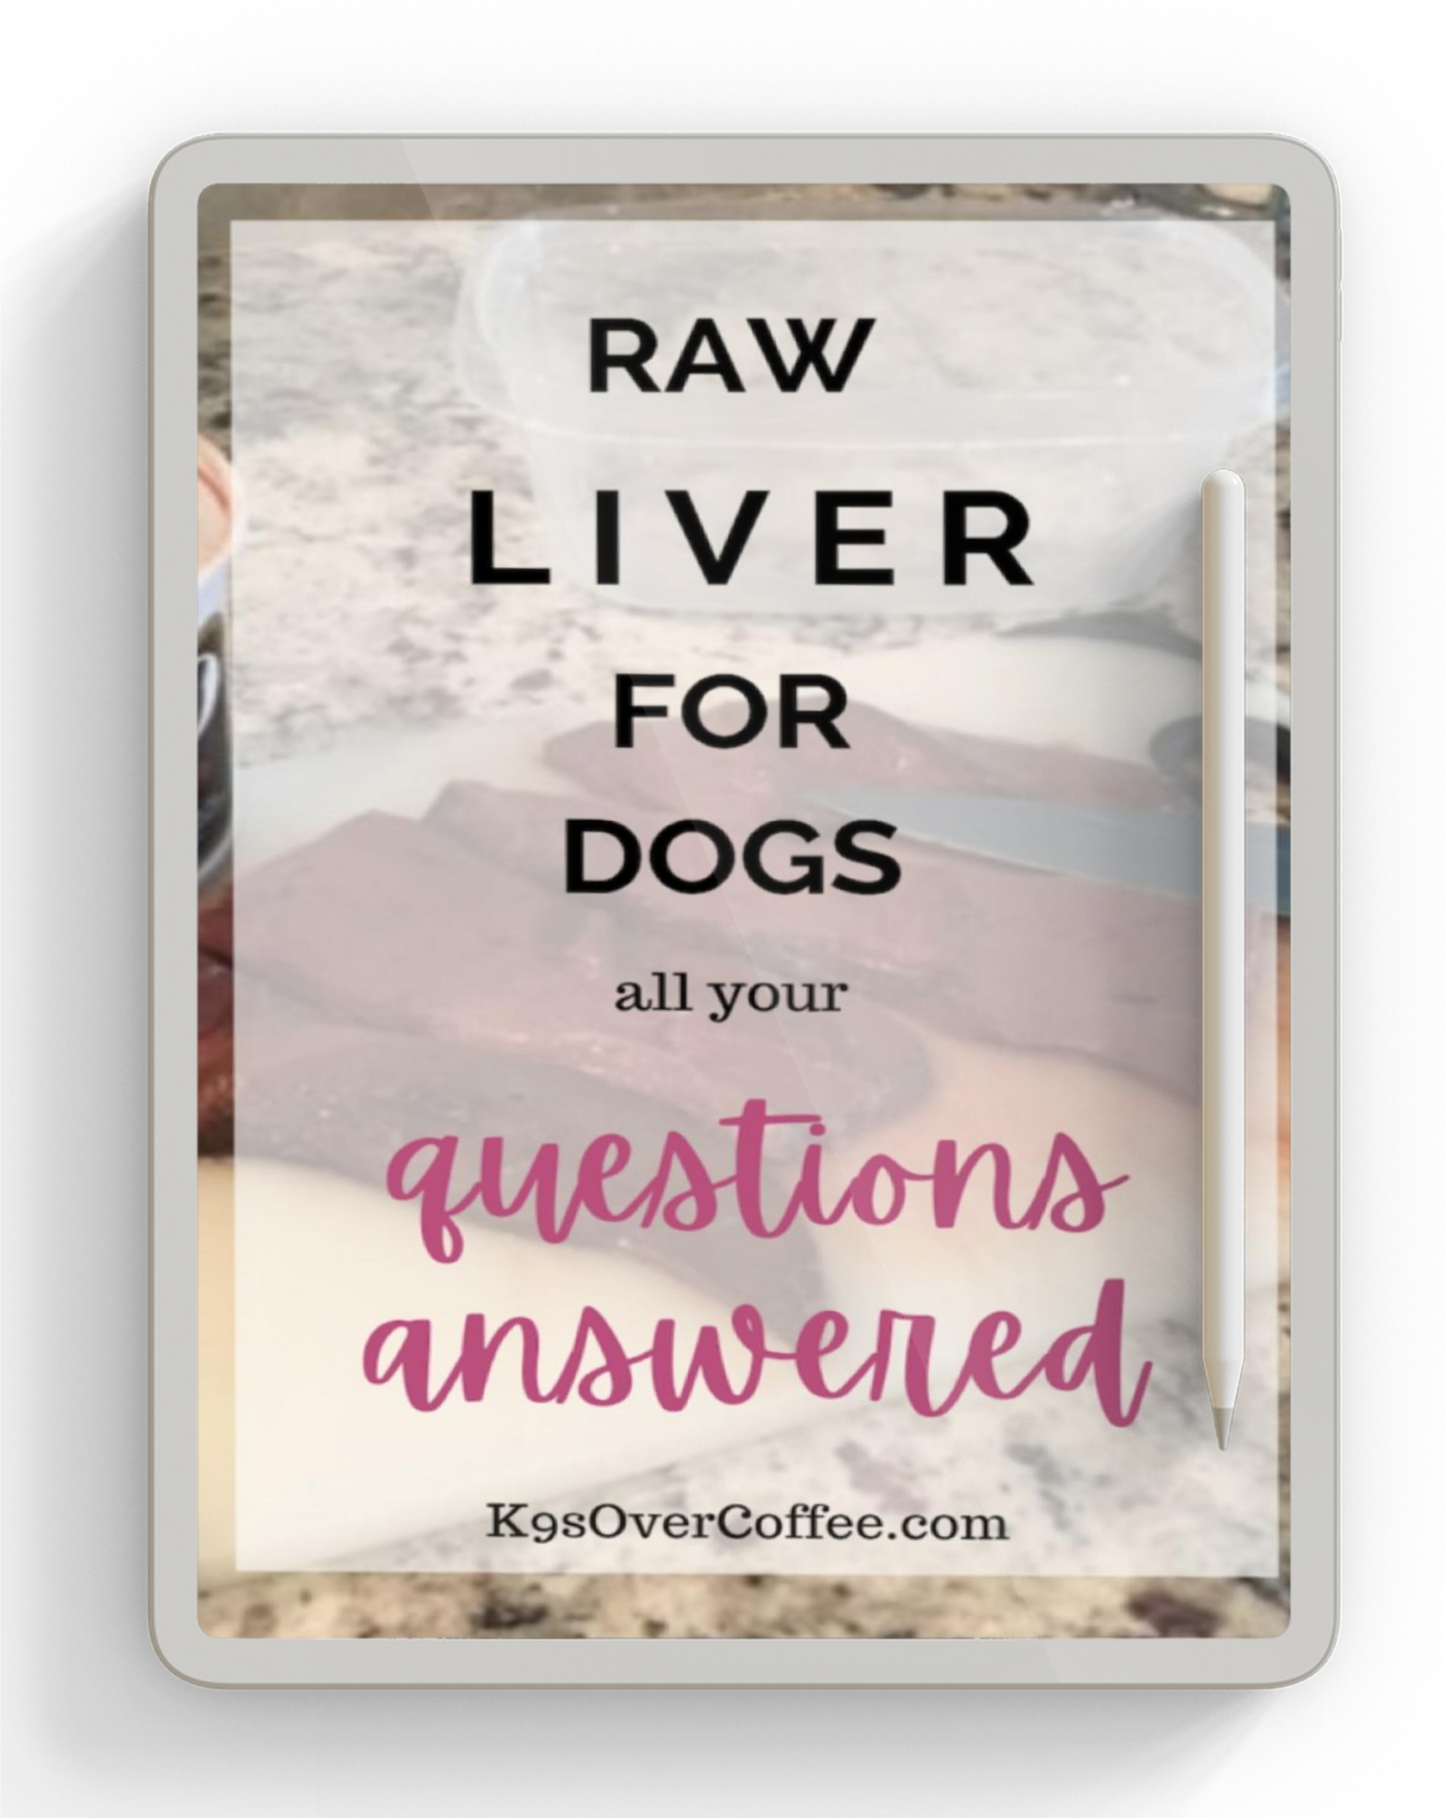 Ebook that covers questions about raw liver for dogs